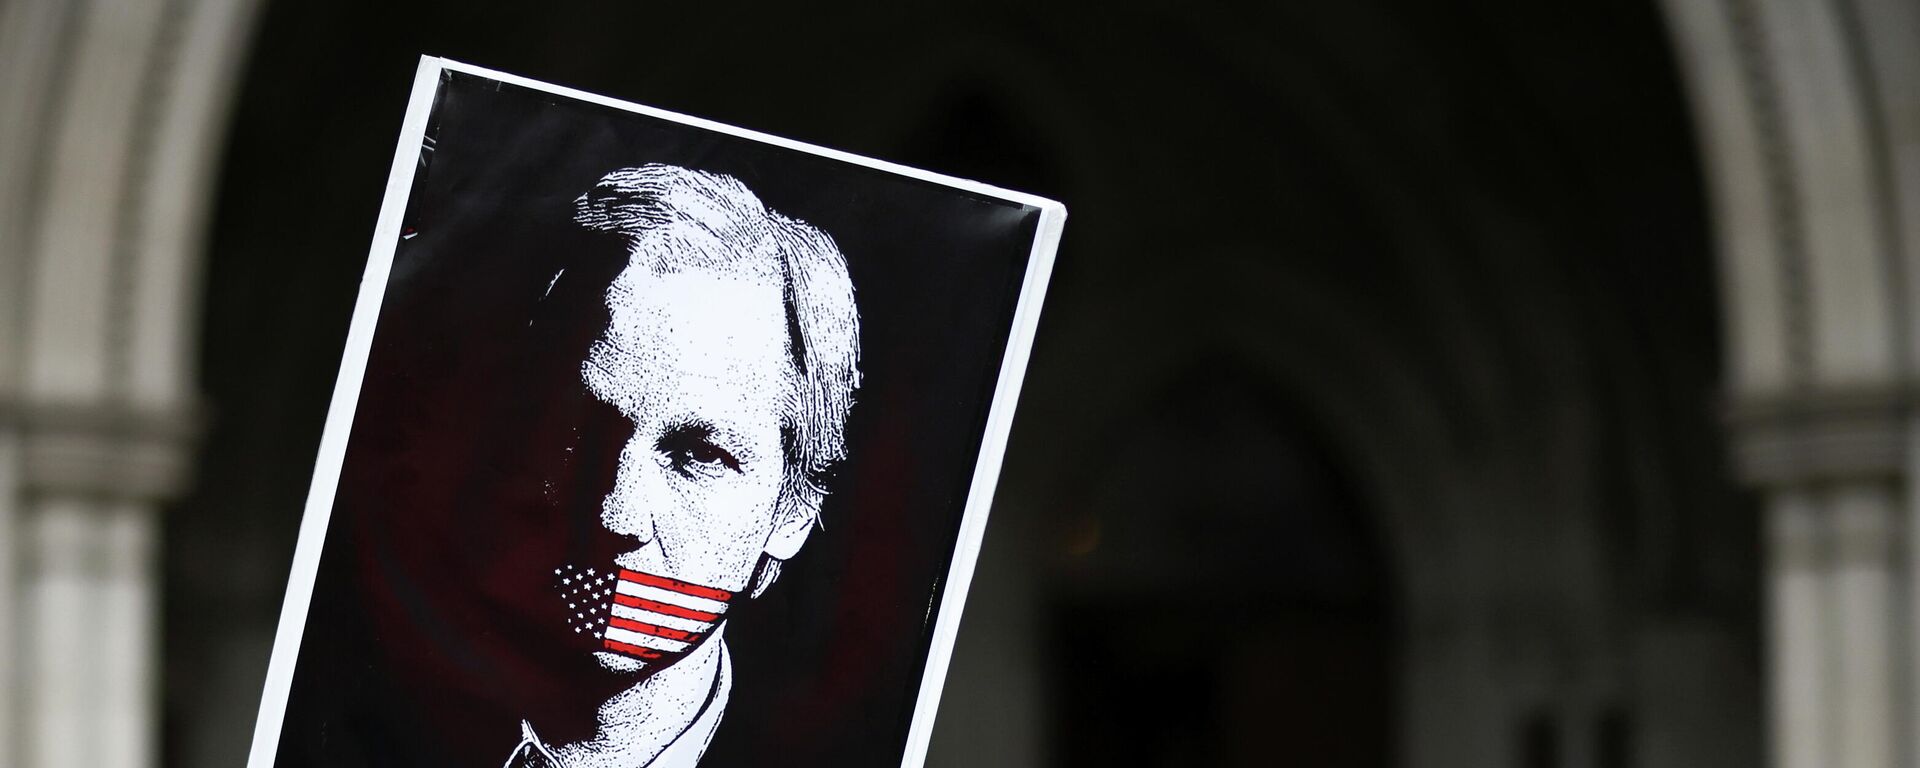 A supporter of Wikileaks founder Julian Assange protests outside the Royal Courts of Justice in London, Britain, October 27, 2021. REUTERS/Henry Nicholls - Sputnik International, 1920, 27.10.2021